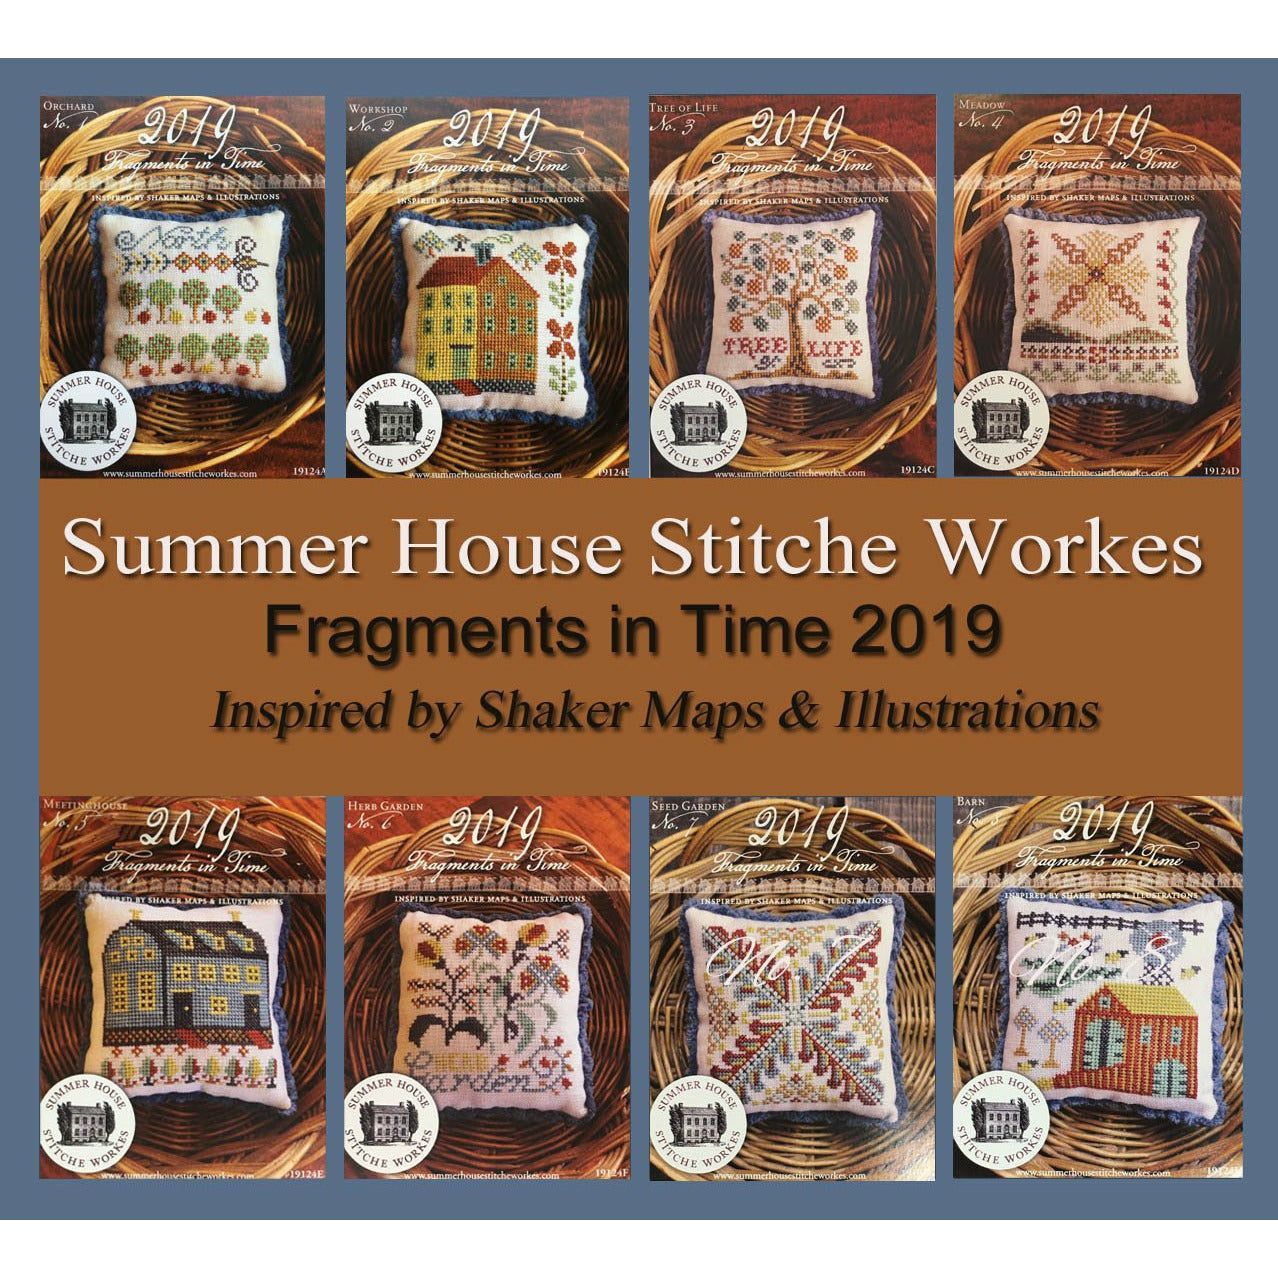 Fragments in Time 2019 Series ~ Shaker Maps & Illustrations